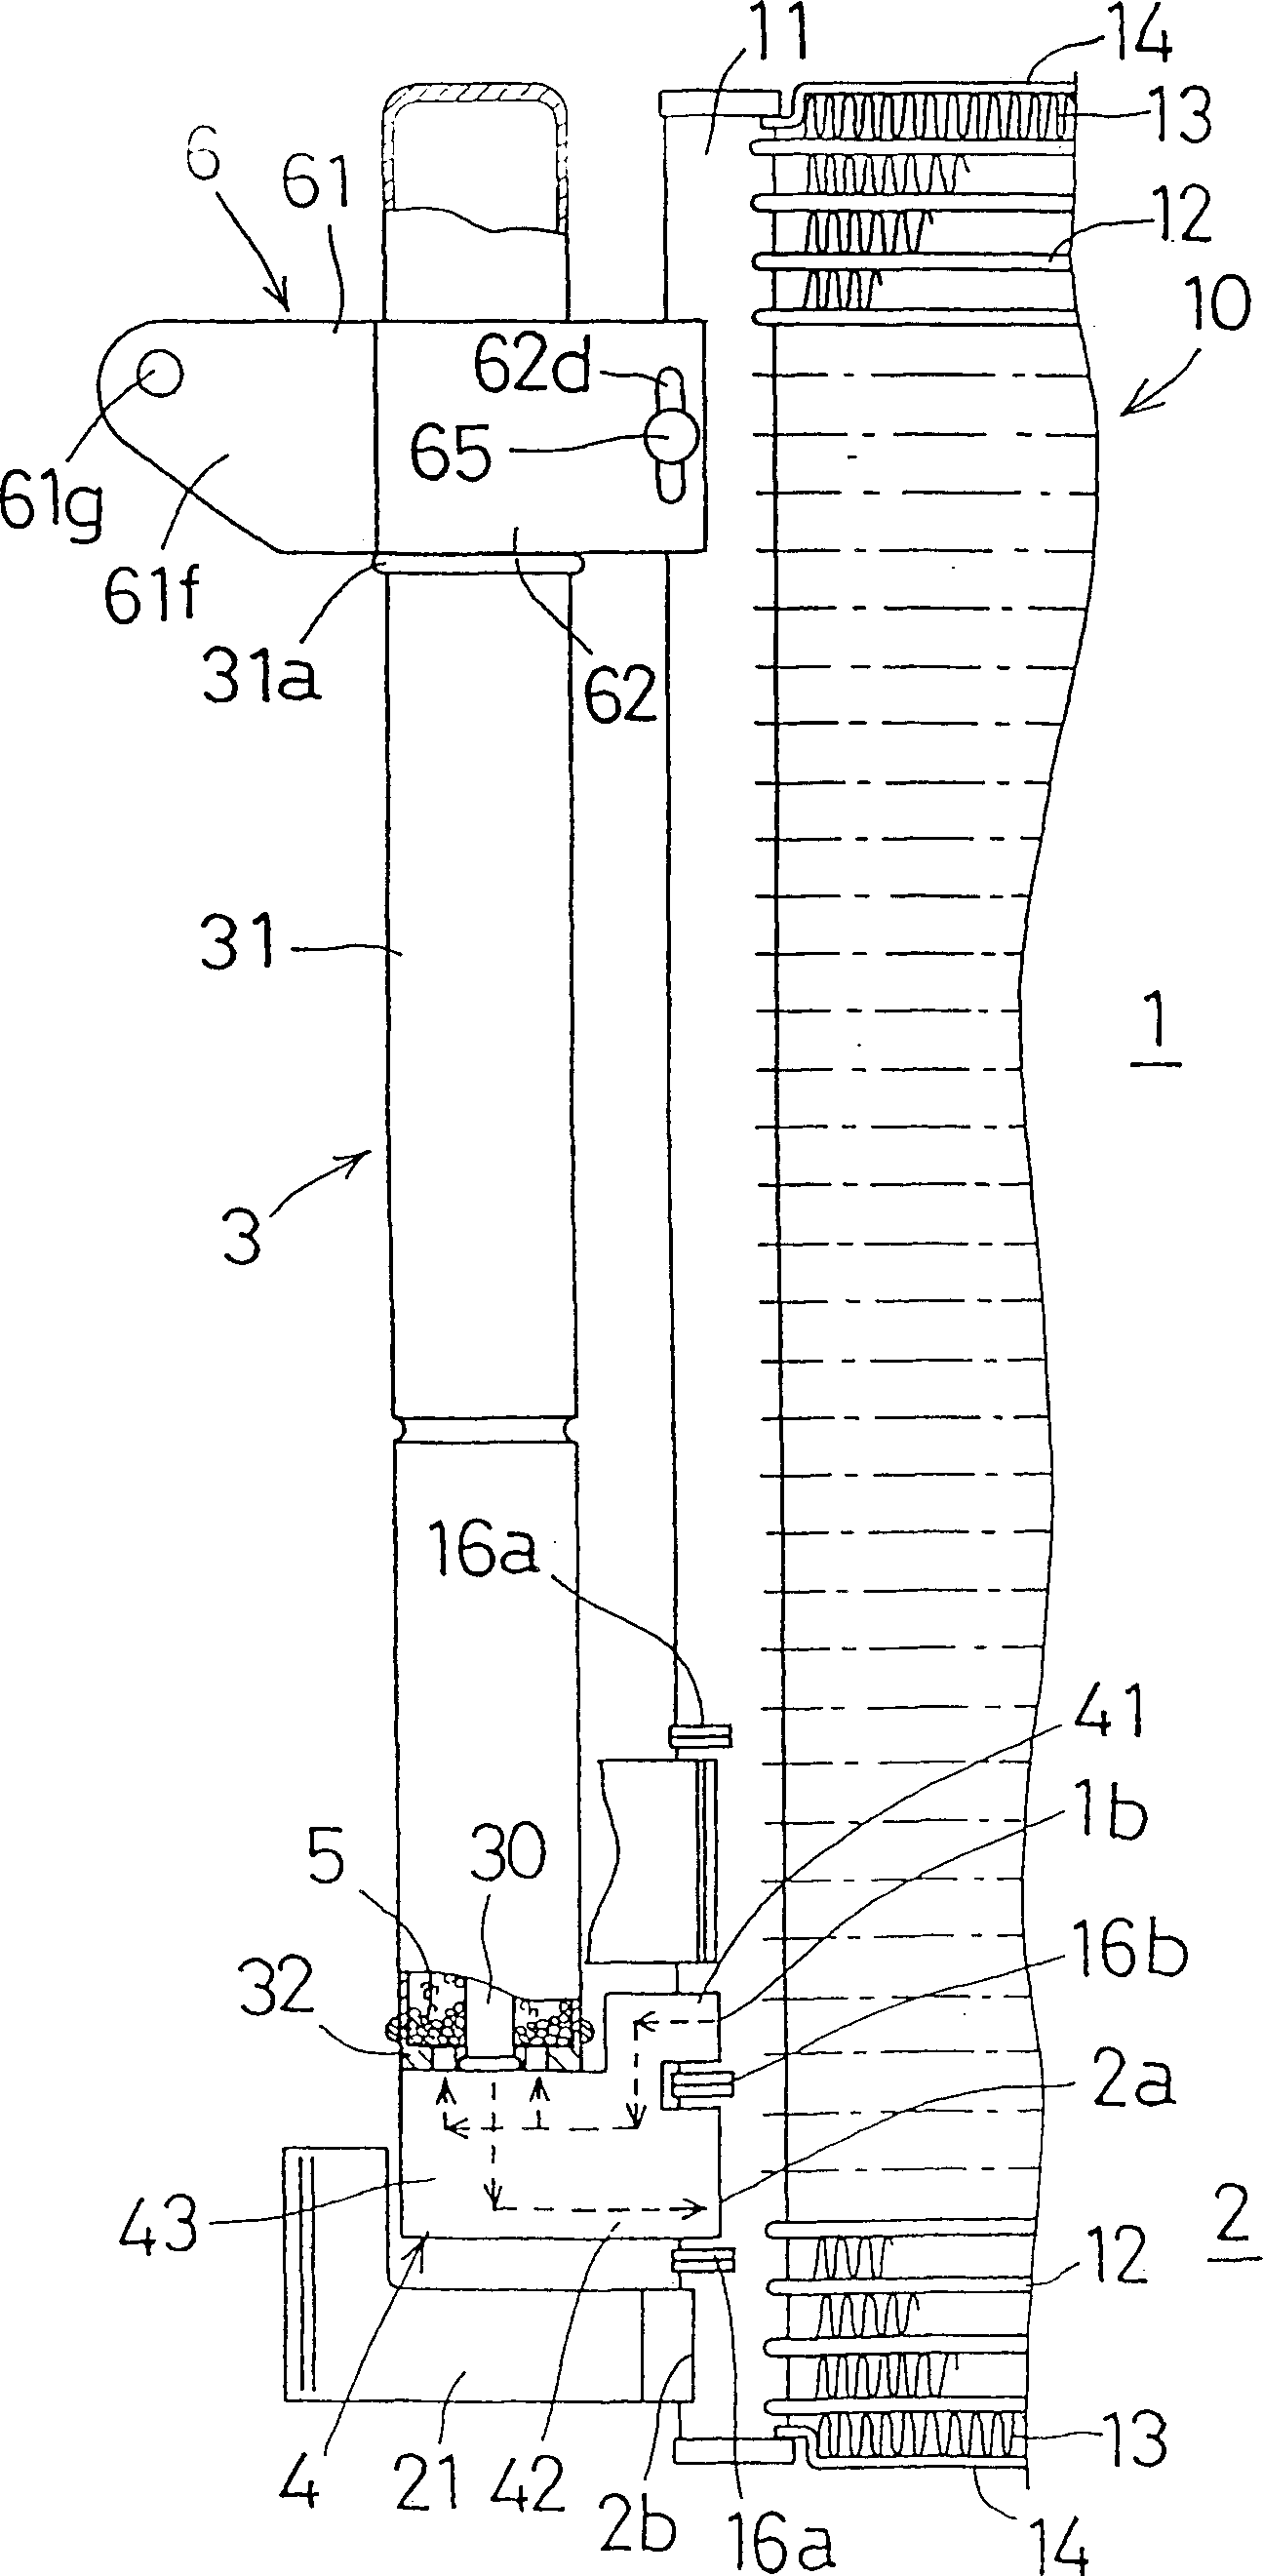 Heat excanger with receiver tank, and refrigeration system